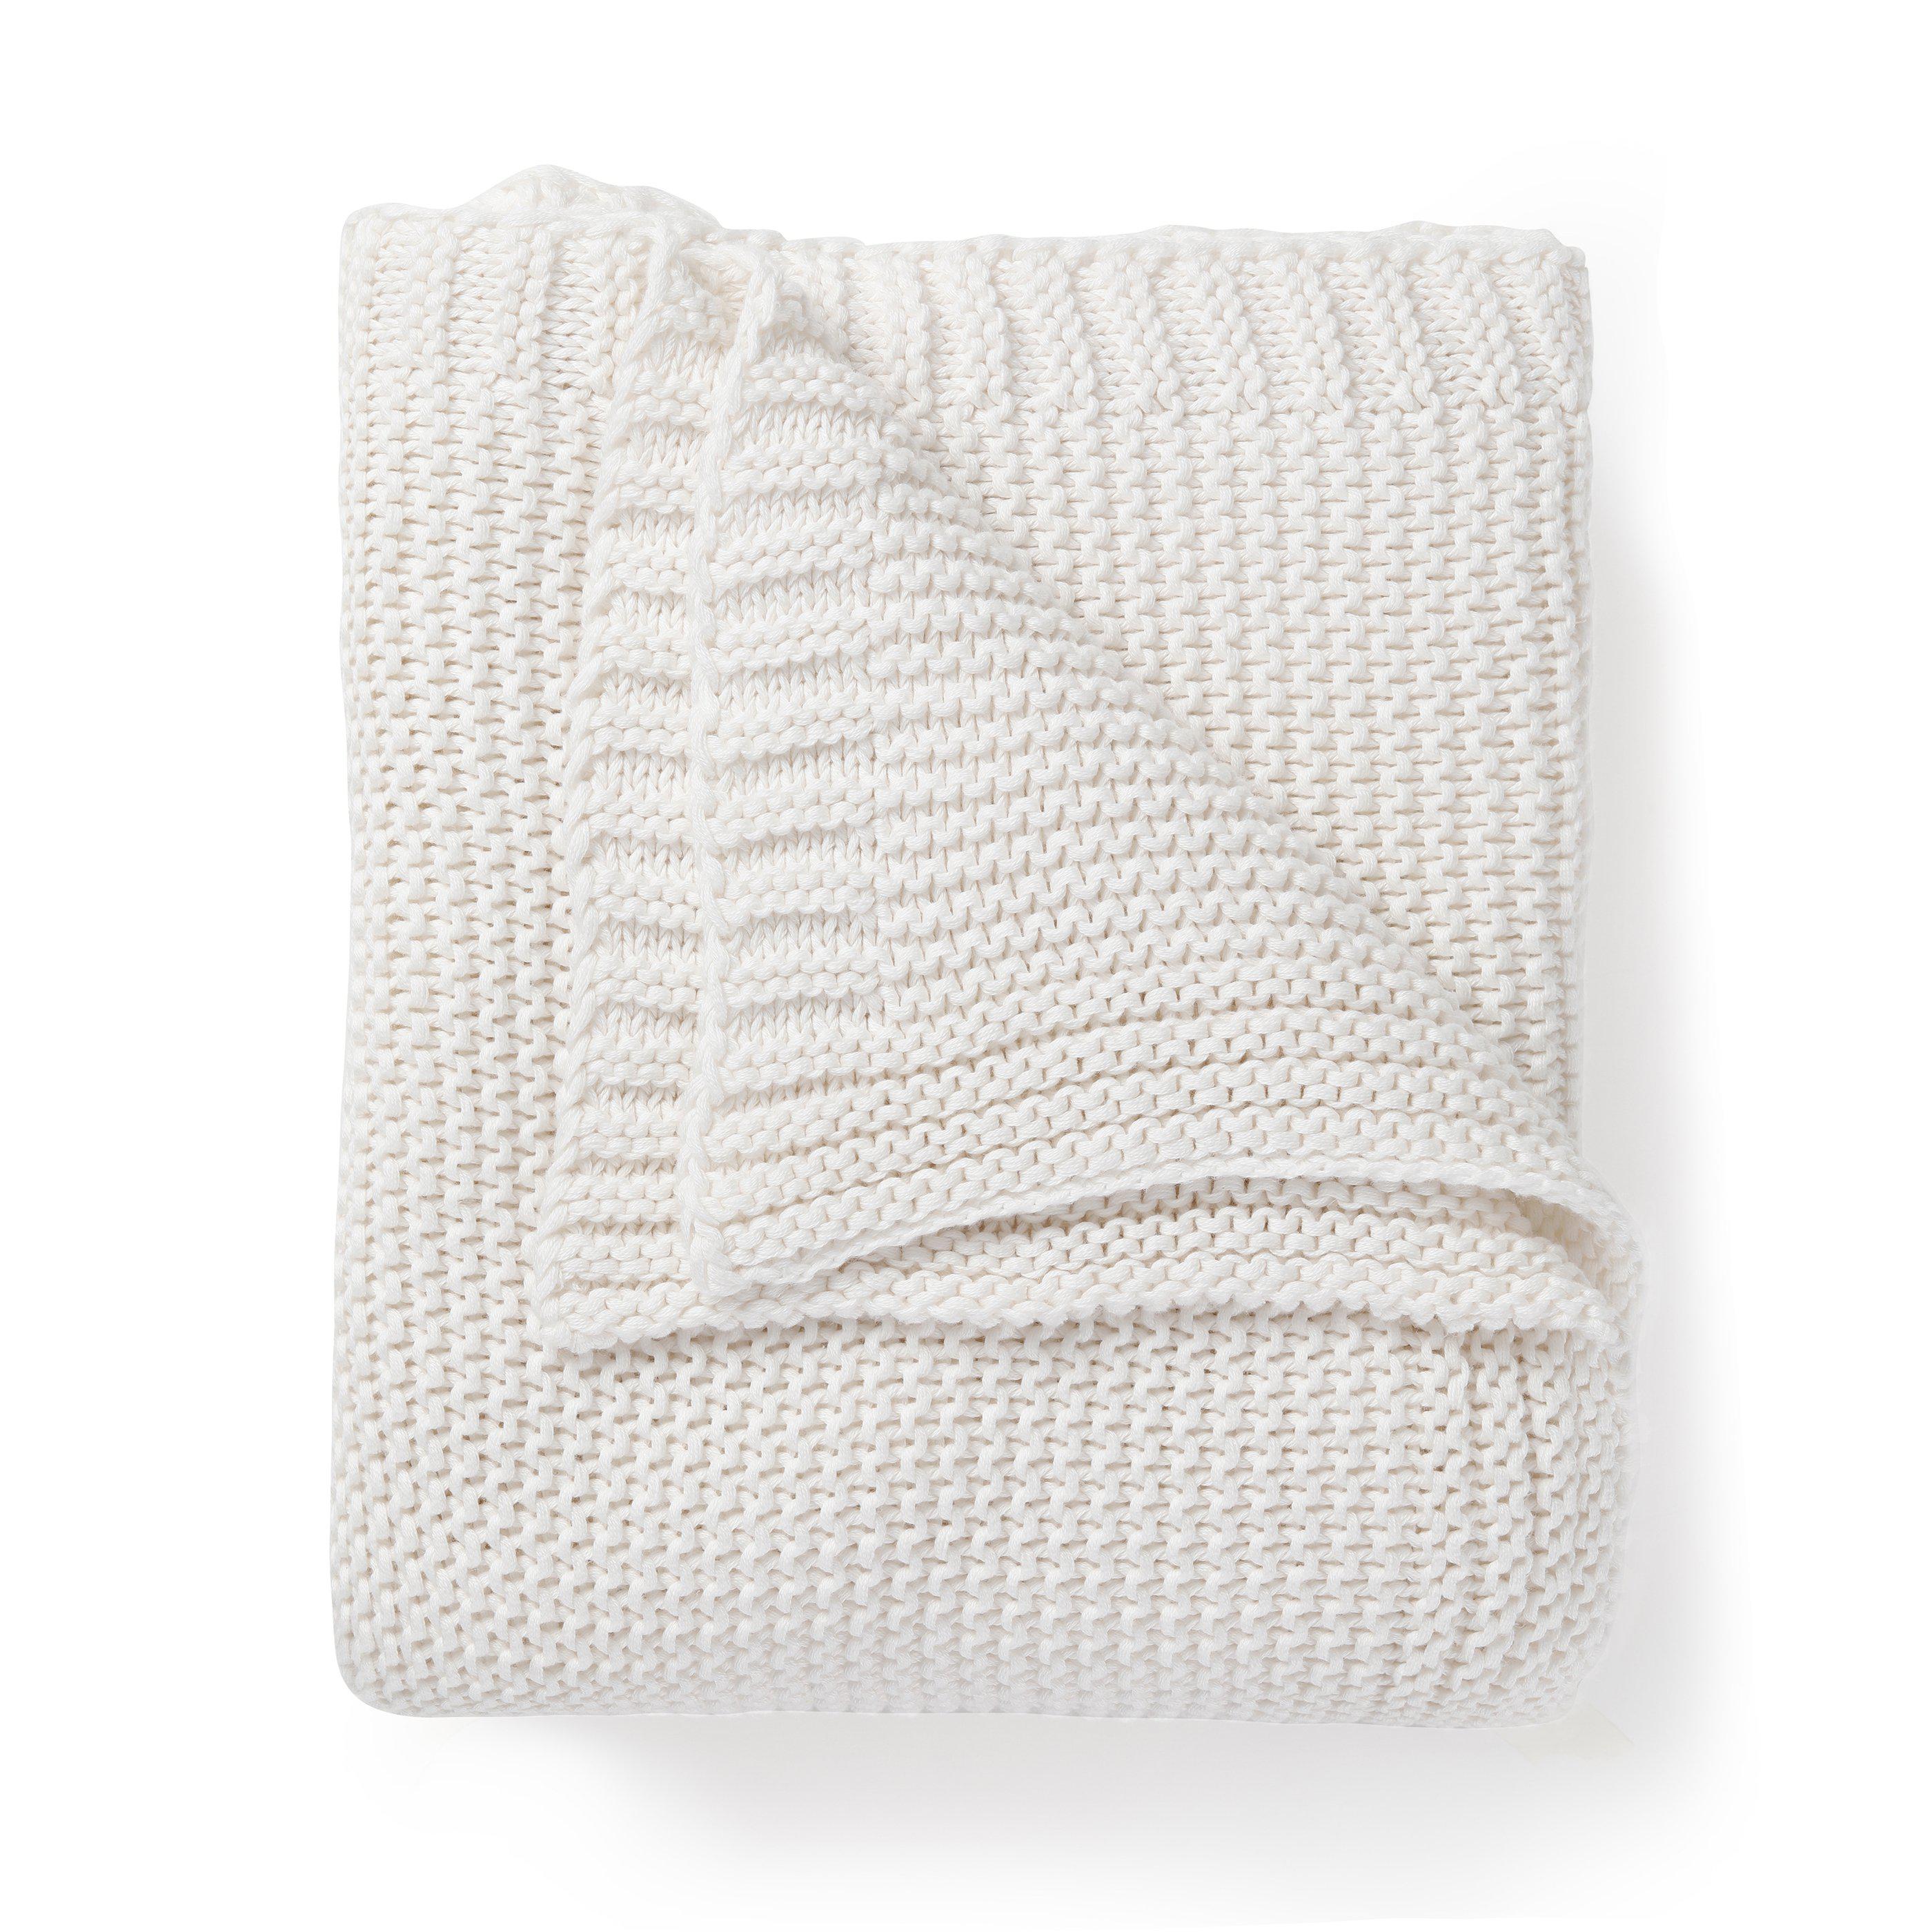 A neatly folded Ella Ivory Chunky Knit Throw Blanket from Makemake Organics isolated on a white background, showcasing its textured, ribbed pattern.